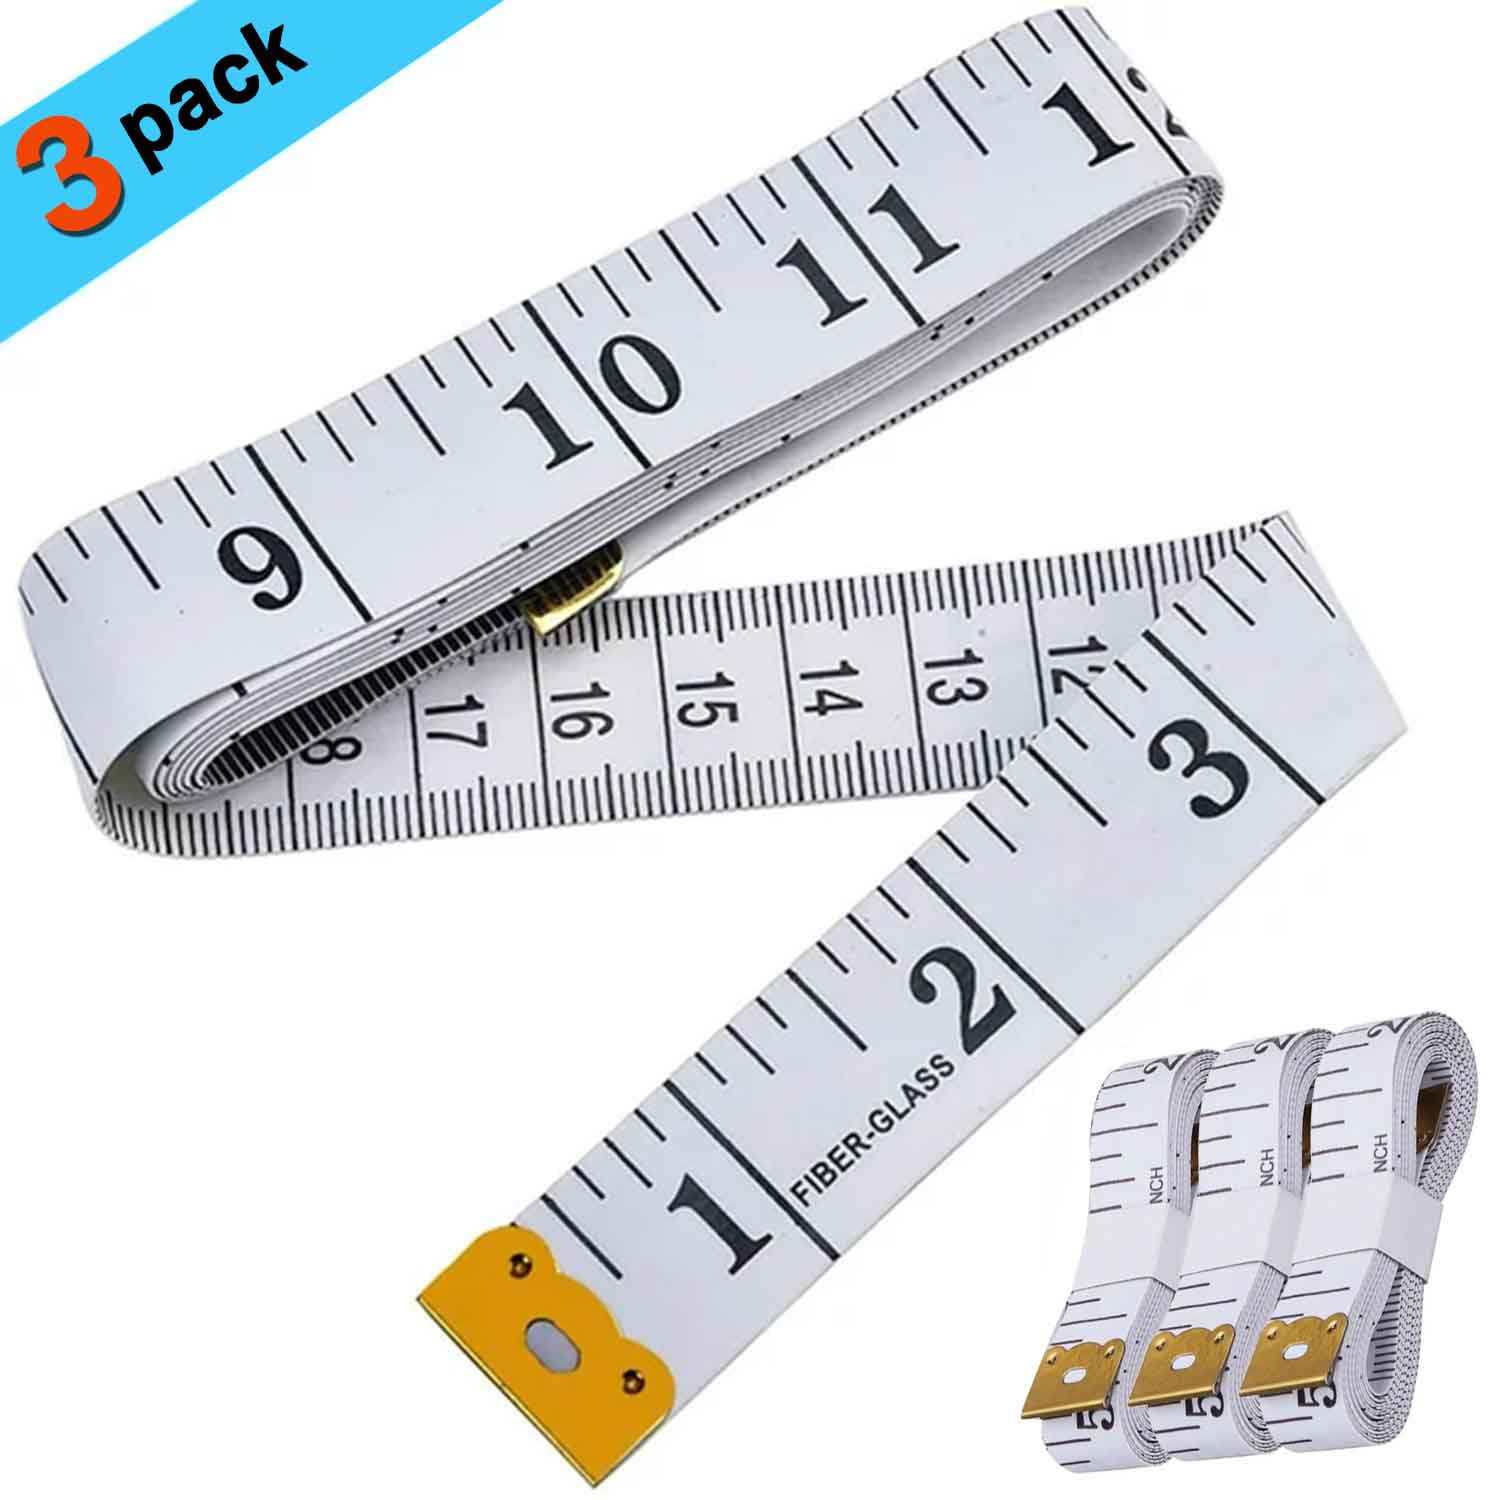 Soft Tape Measure for Body Measuring Tape Soft Sewing Tailor Fabric Cloth Tape  Measure for Weight Loss Flexible Ruler Double Scale 150cm/60inch (Green)  price in Egypt,  Egypt